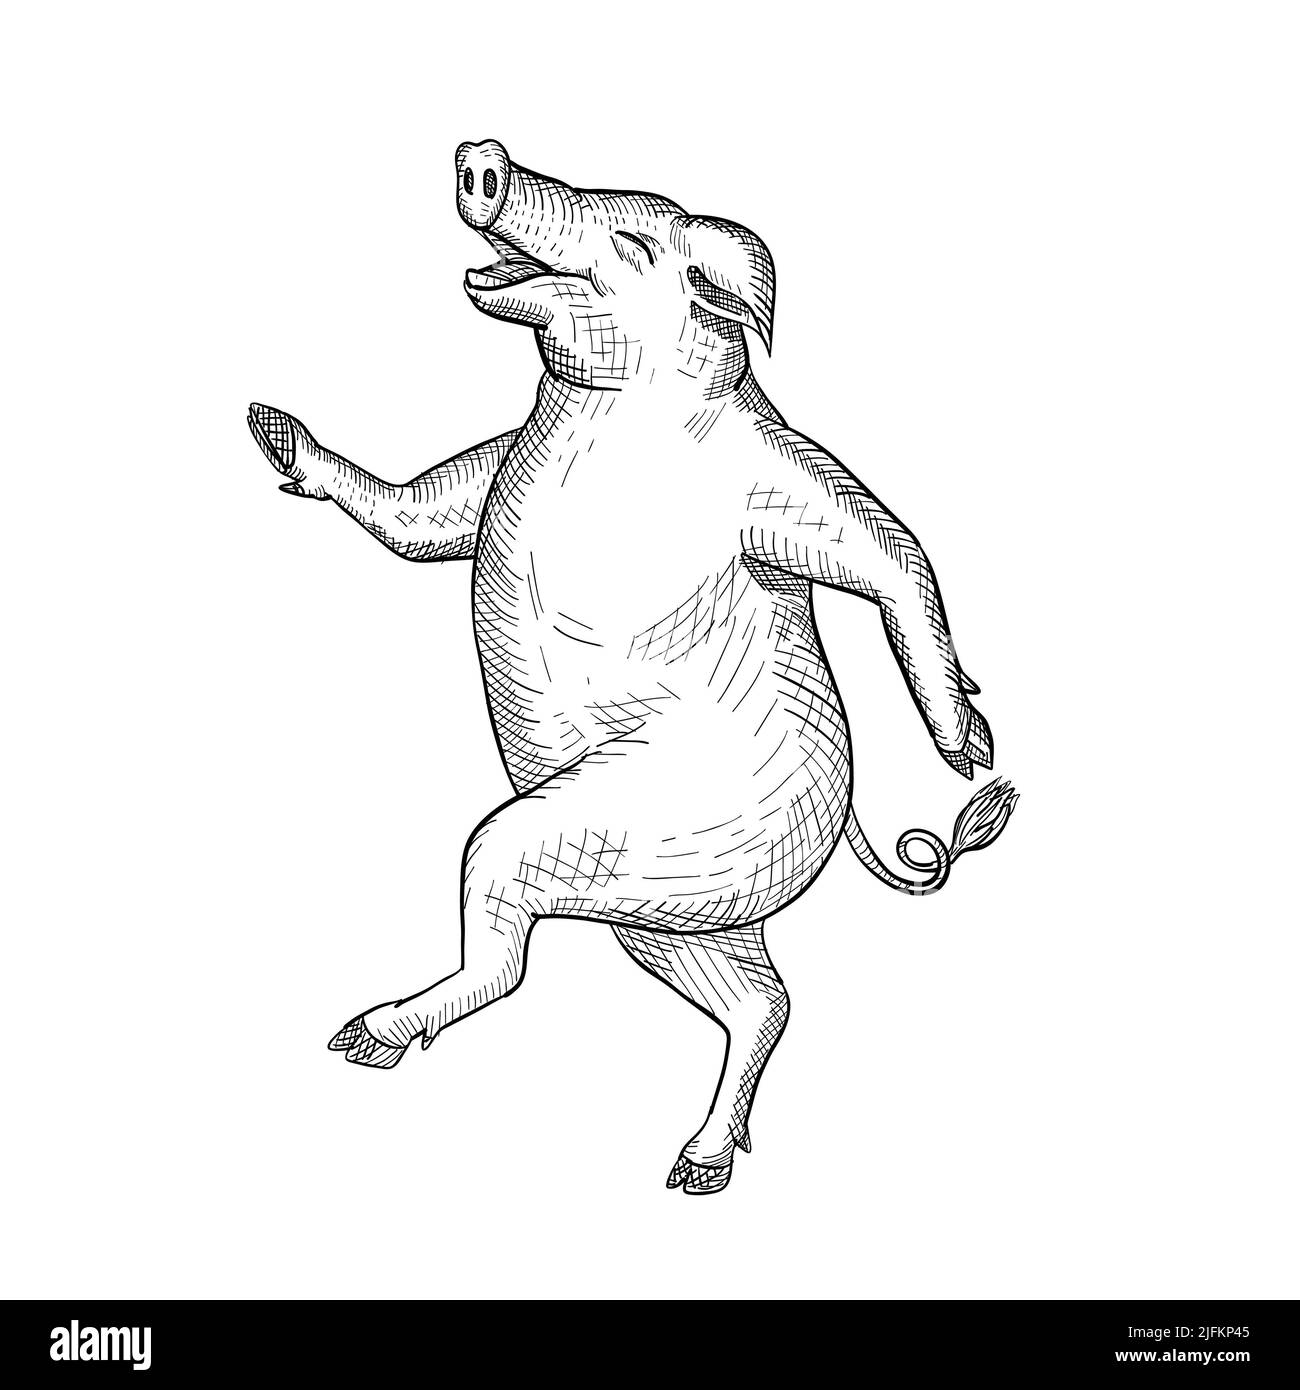 Drawing sketch style illustration of a happy and jolly pig, hog or boar dancing, walking or taking a stride viewed from side on isolated white Stock Photo